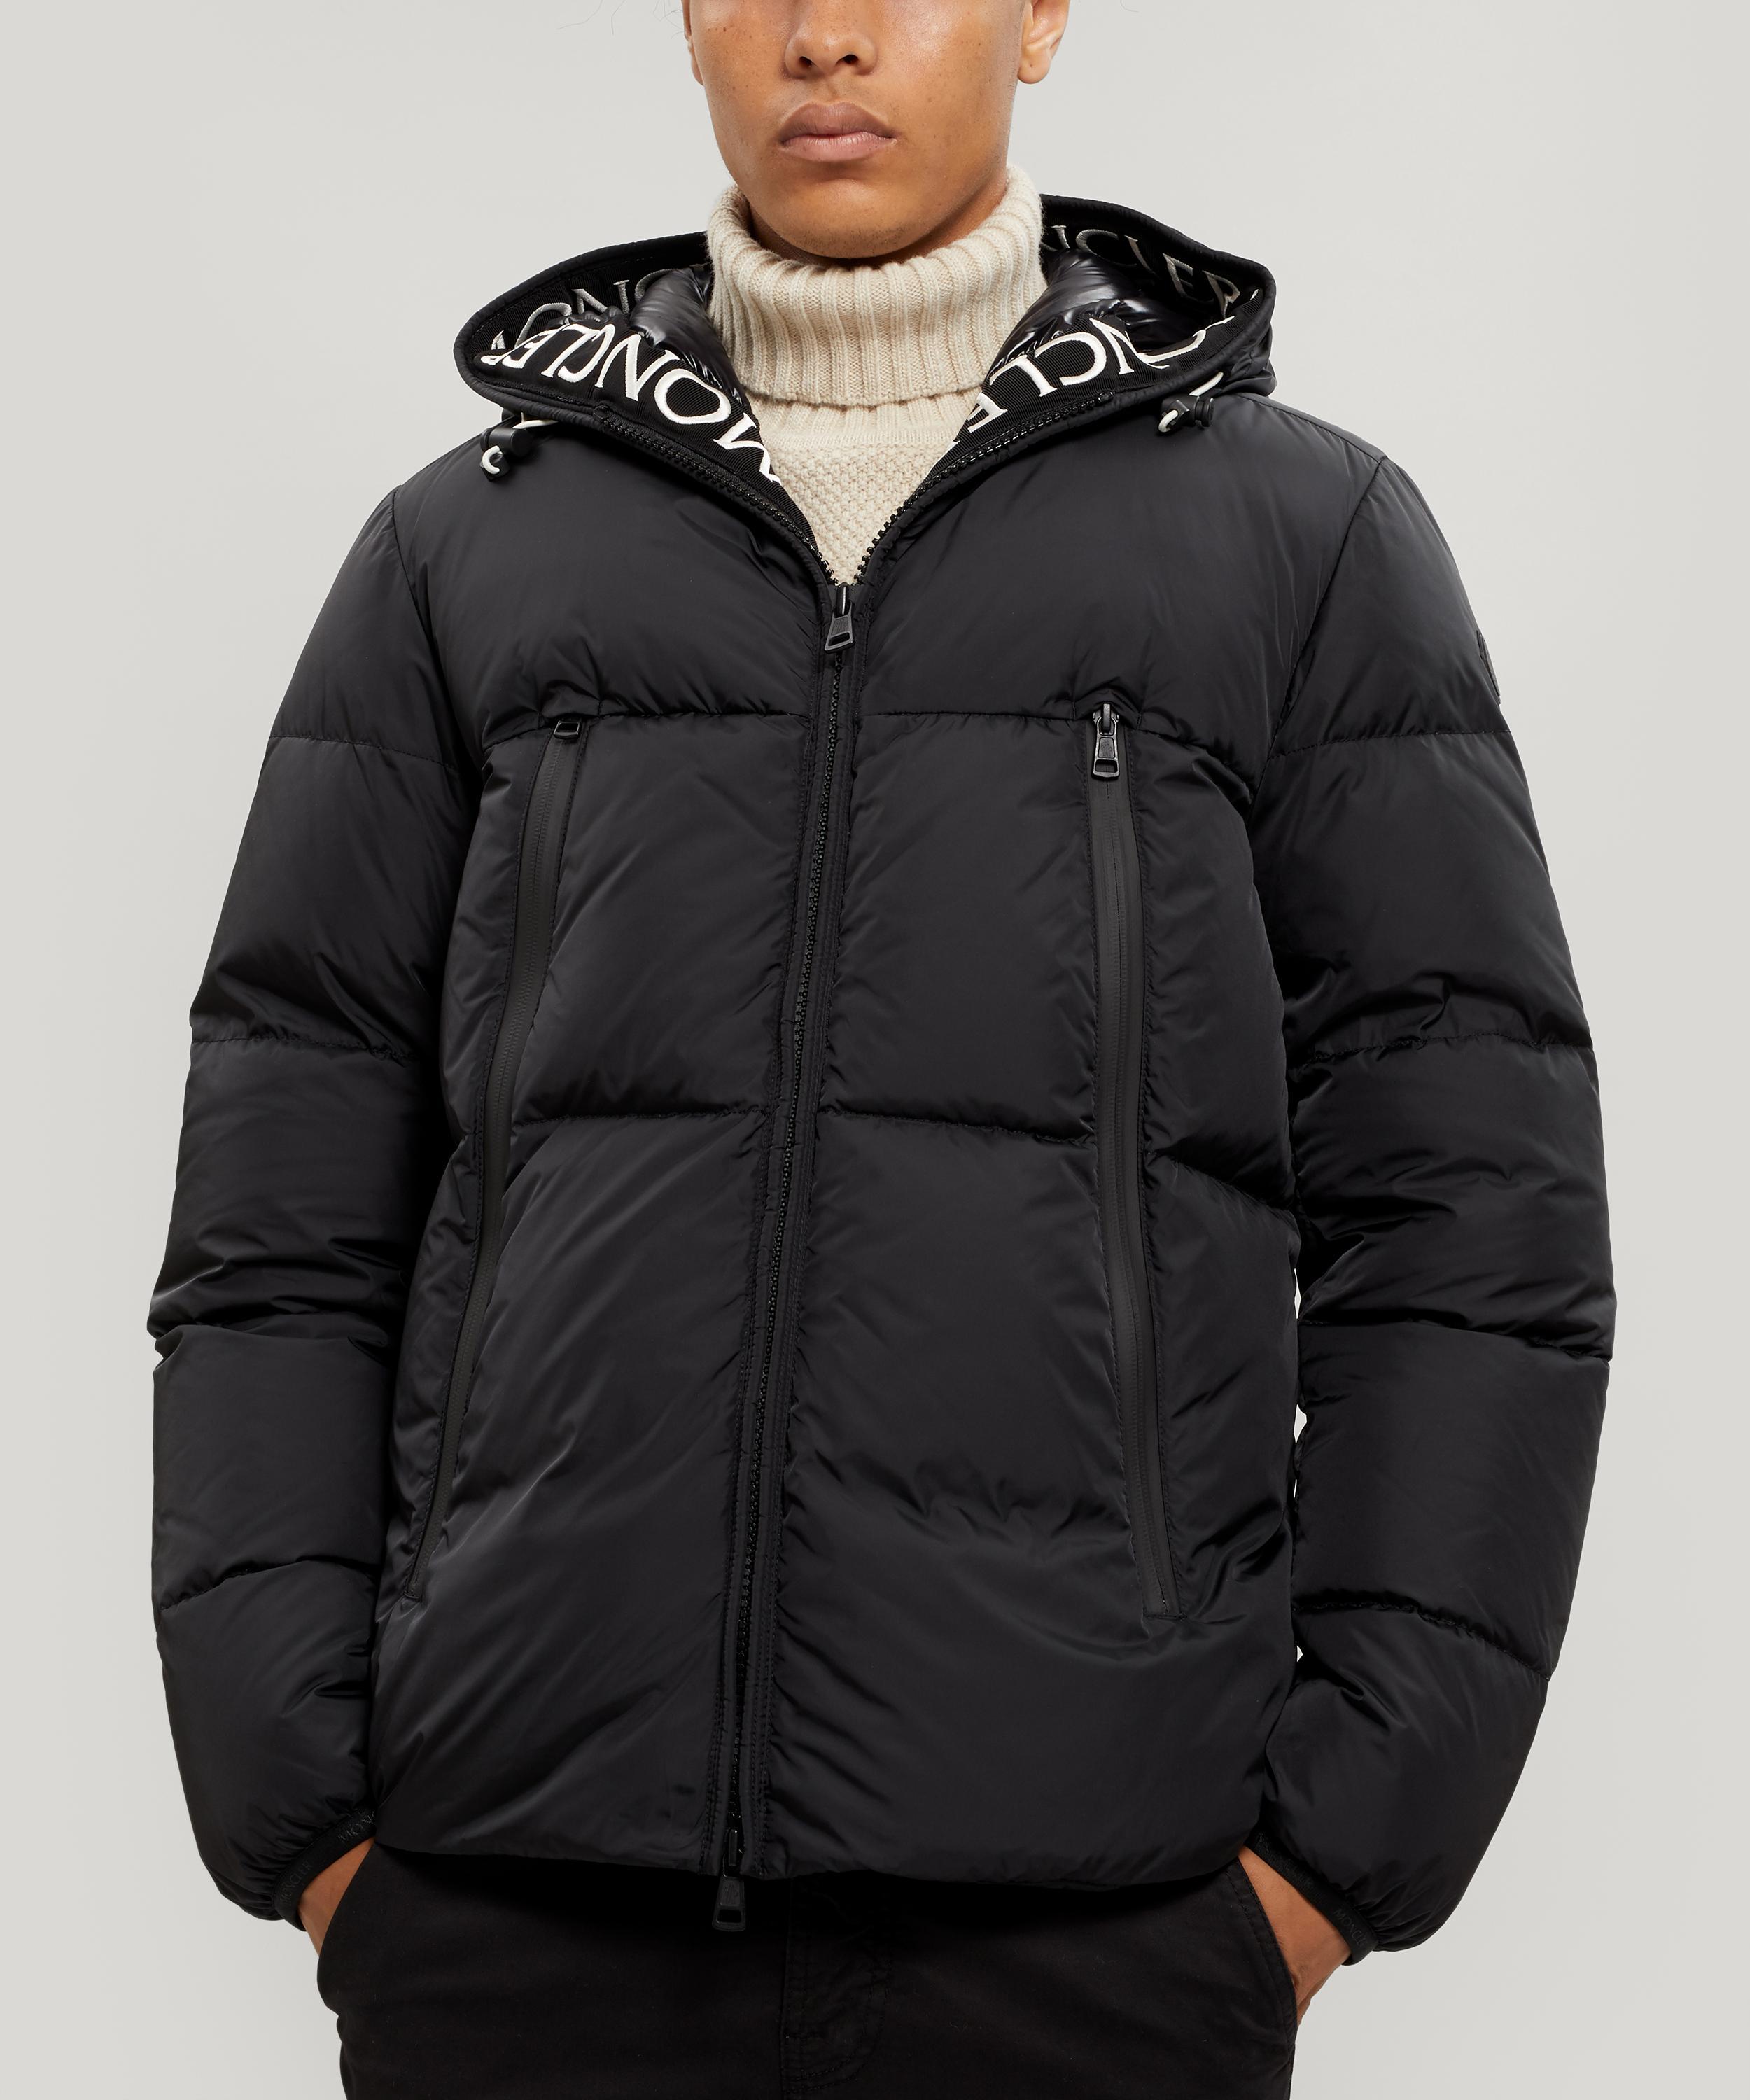 Moncler Synthetic Text-trimmed Hooded Puffer Jacket in Black for Men - Lyst